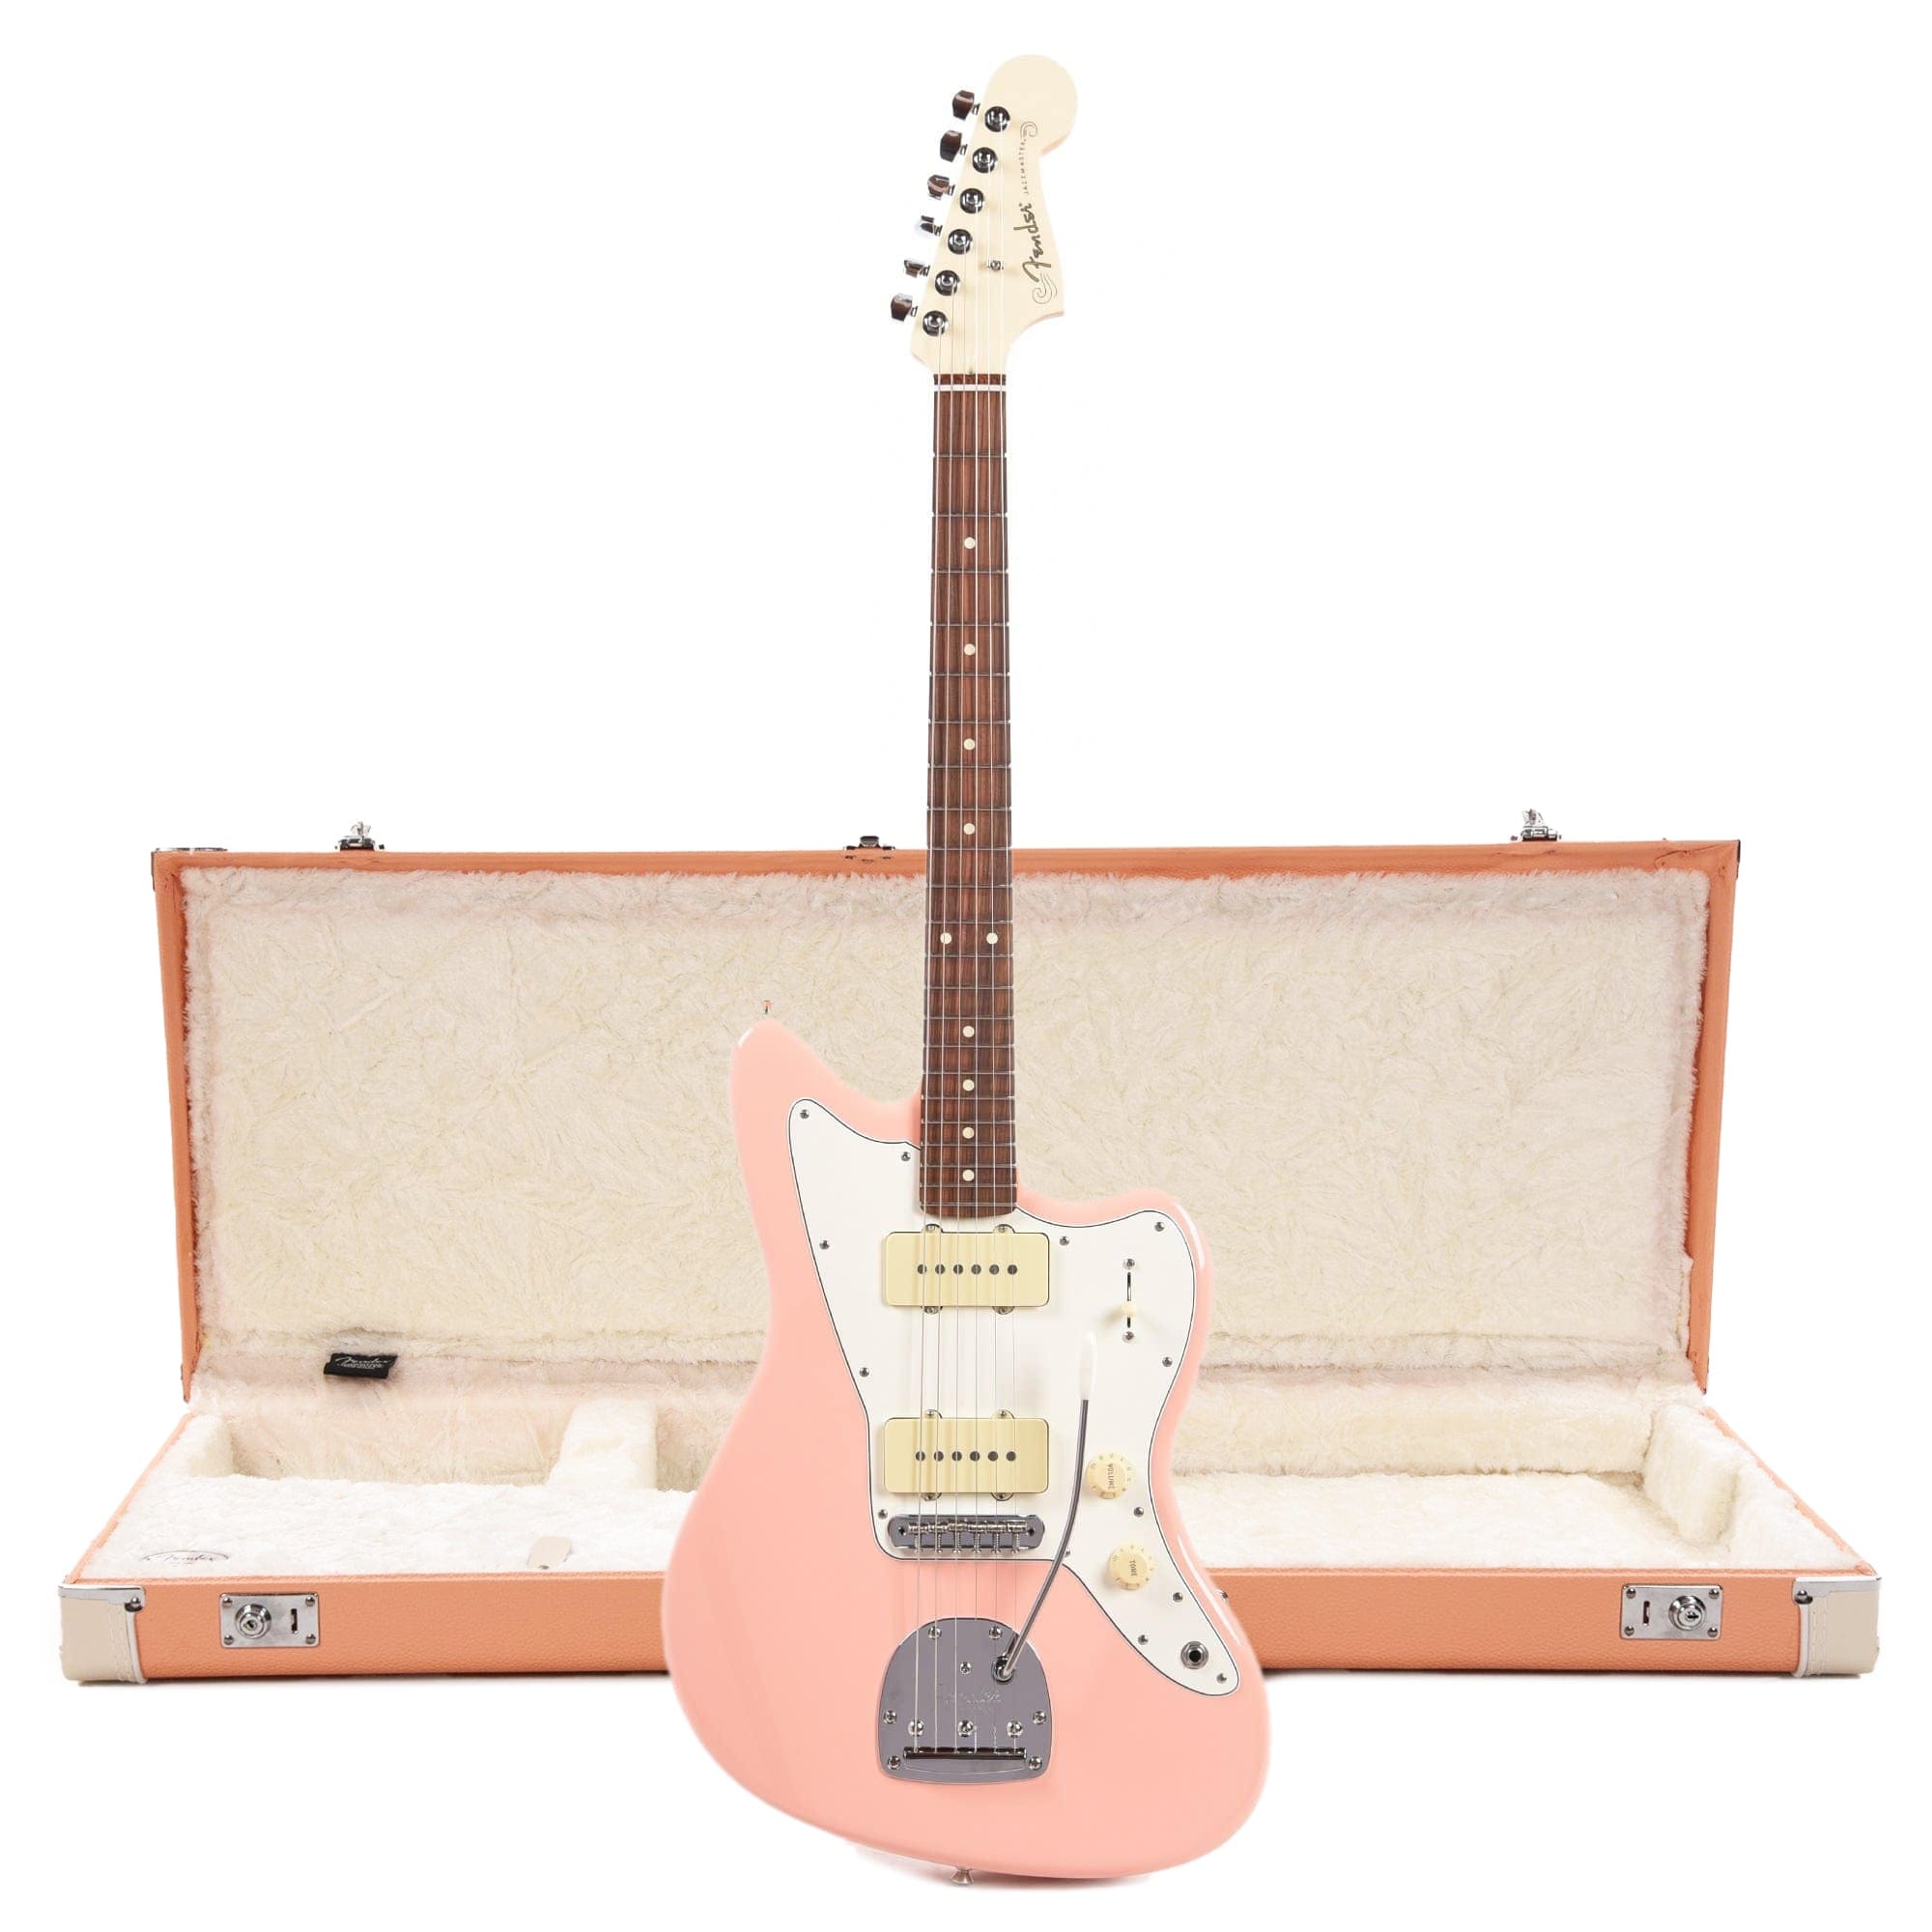 Fender Player Jazzmaster Shell Pink w/Olympic White Headcap, Pure 